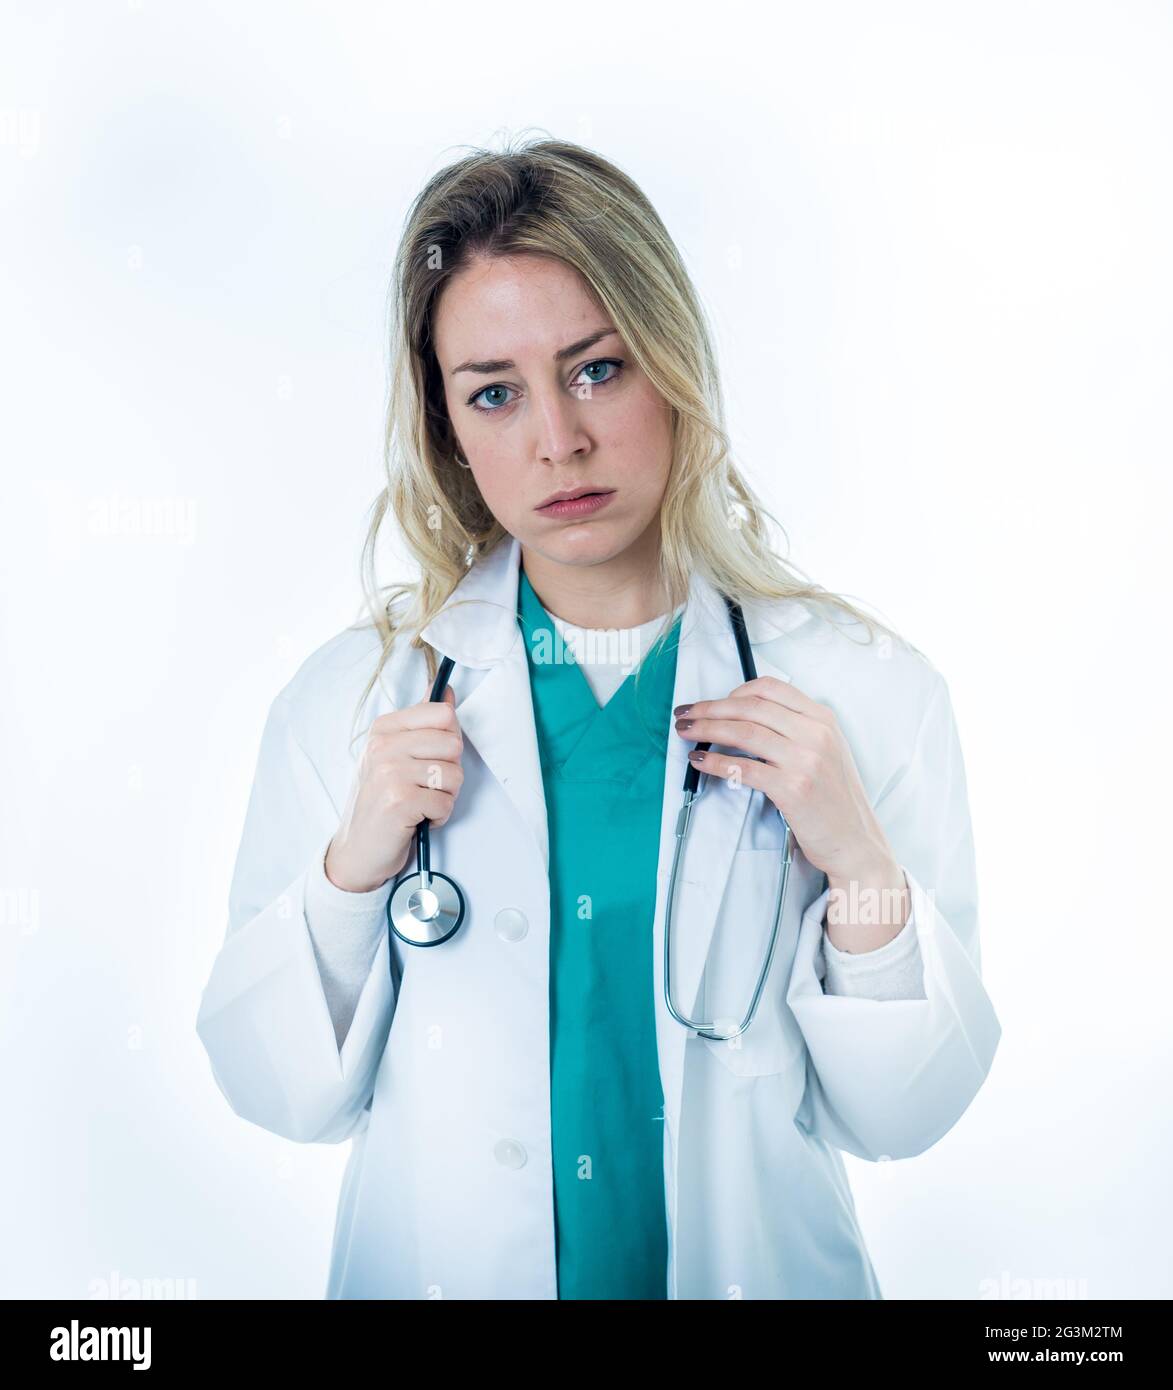 Overwhelmed female doctor or nurse wearing white coat over green scrub hospital uniform. frustrated and tired working at intensive care unit. Emotiona Stock Photo